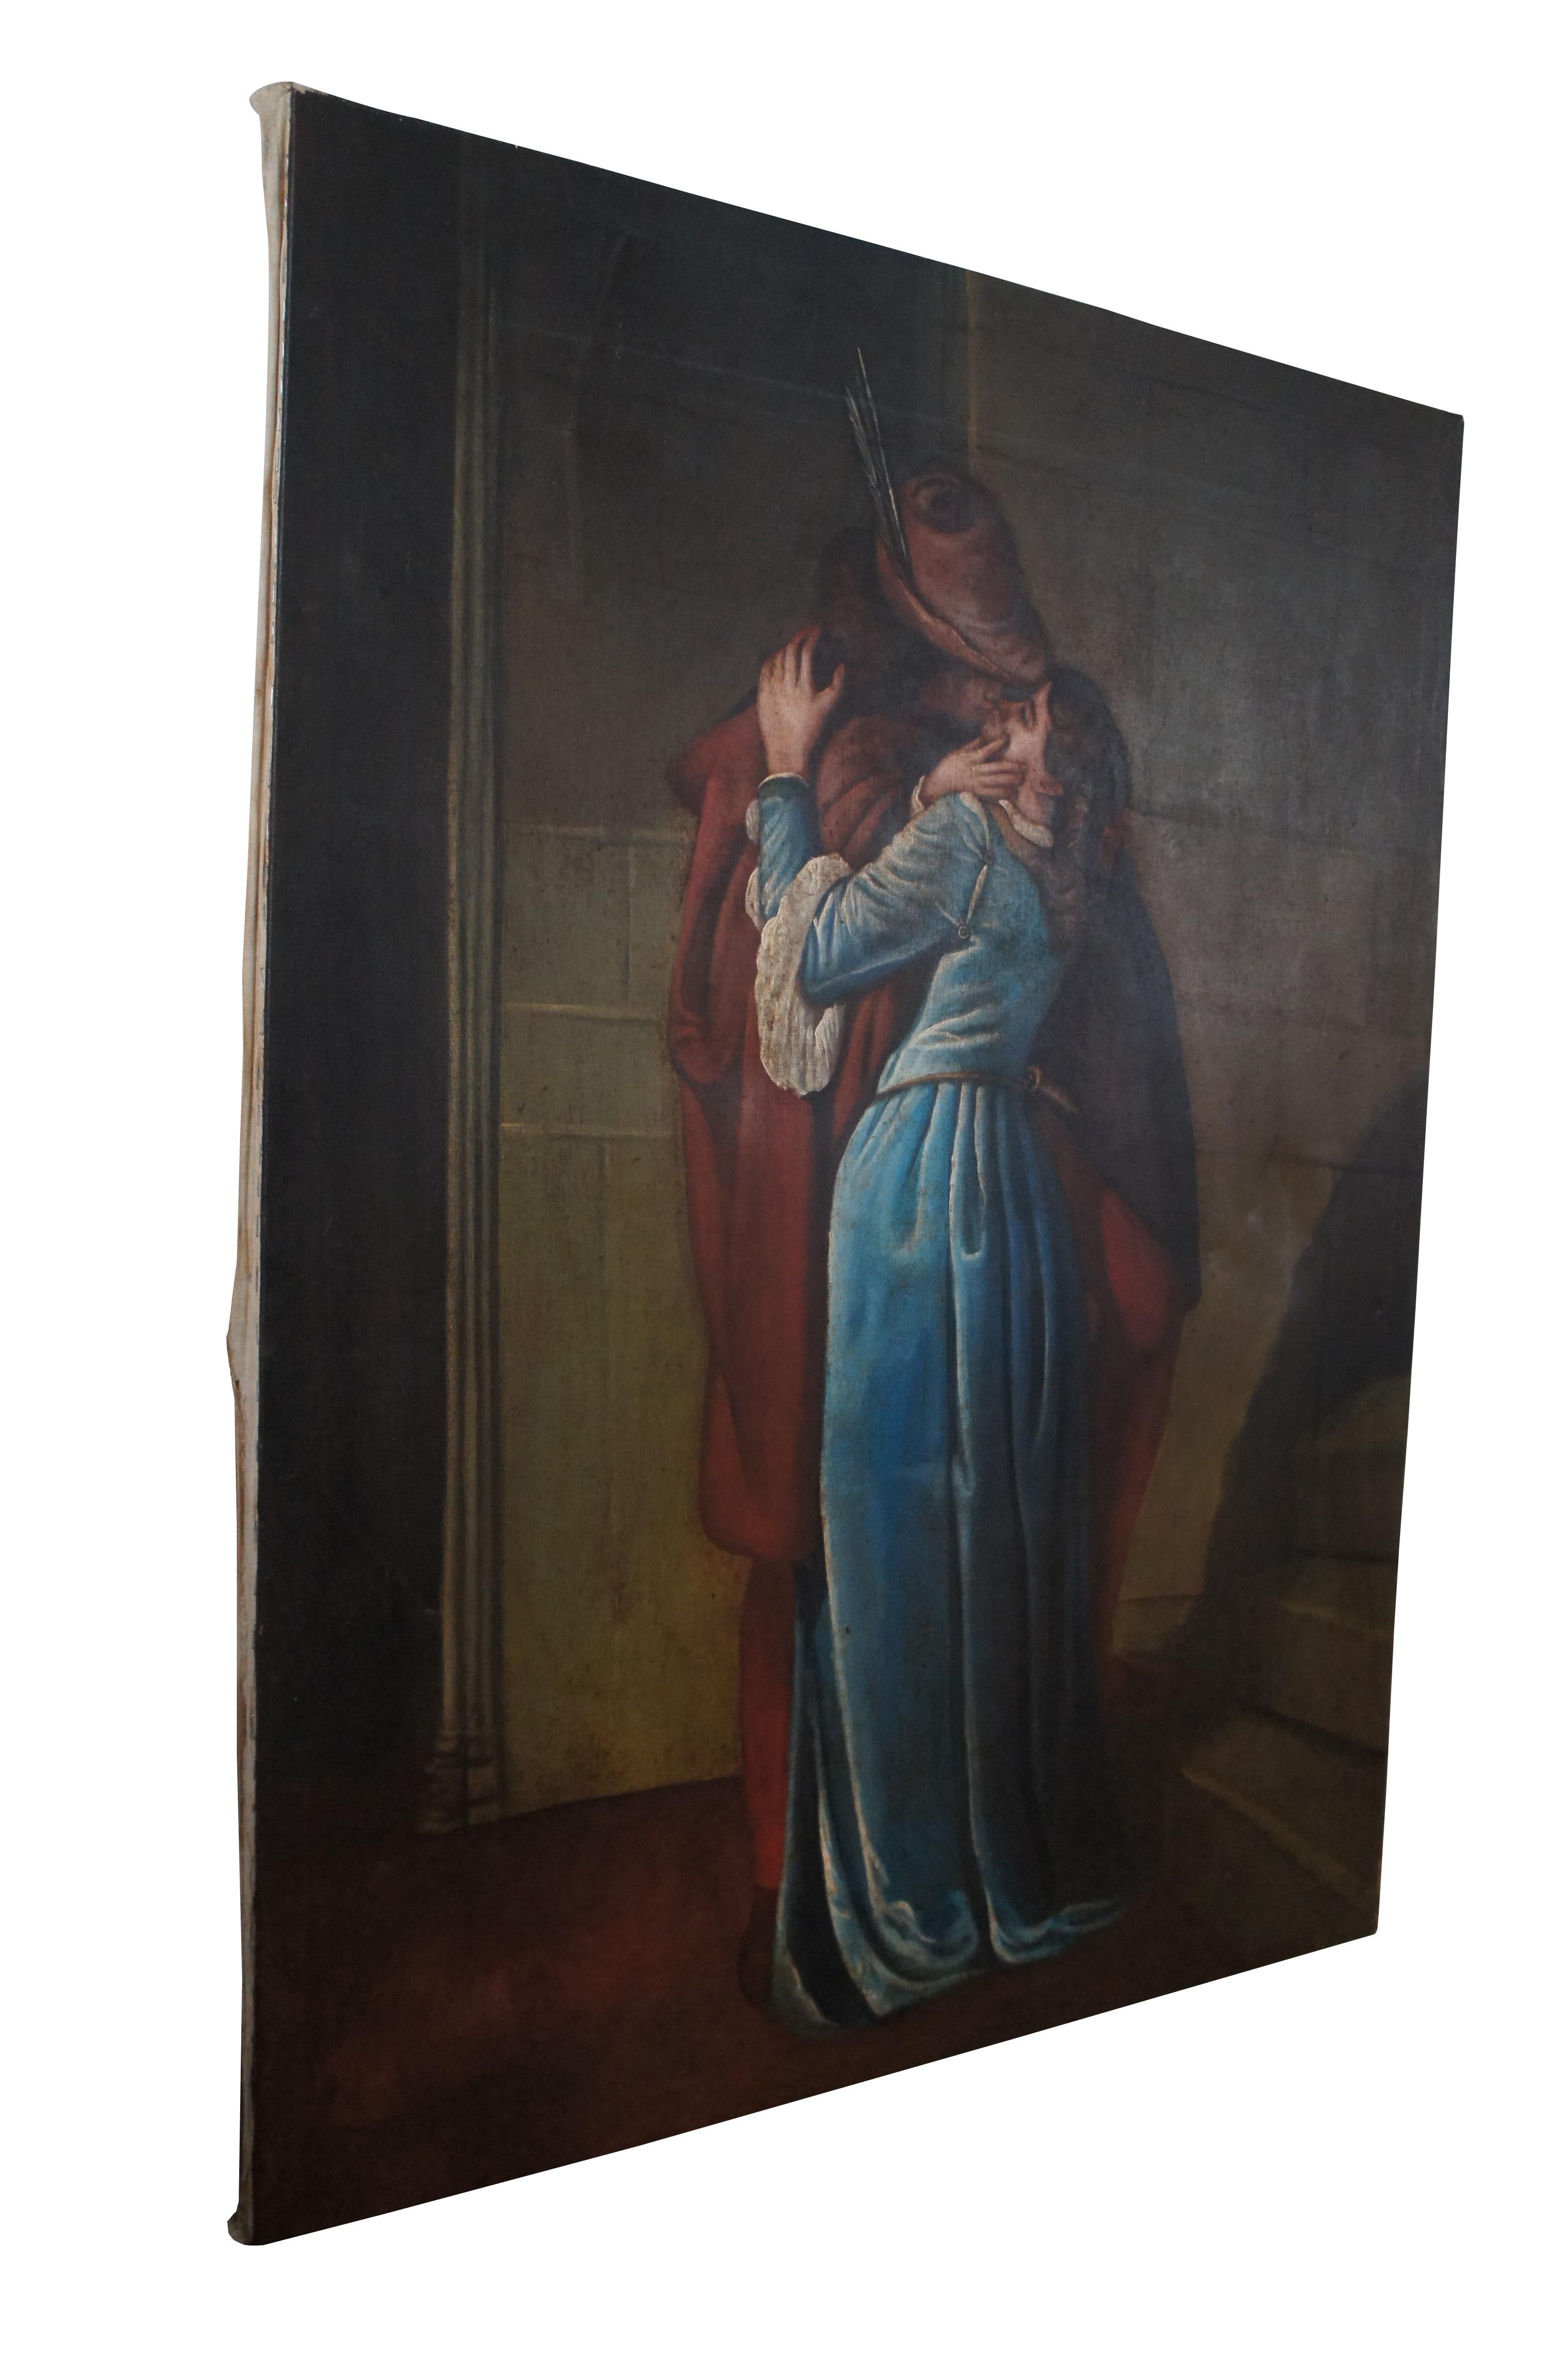 Vintage reproduction painting on linen by Hidalgo featuring The Kiss by Francesco Heyez.

Il bacio (Italian pronunciation: [il ˈbaːtʃo]; The Kiss) is an 1859 painting by the Italian artist Francesco Hayez. It is possibly his best-known work. This